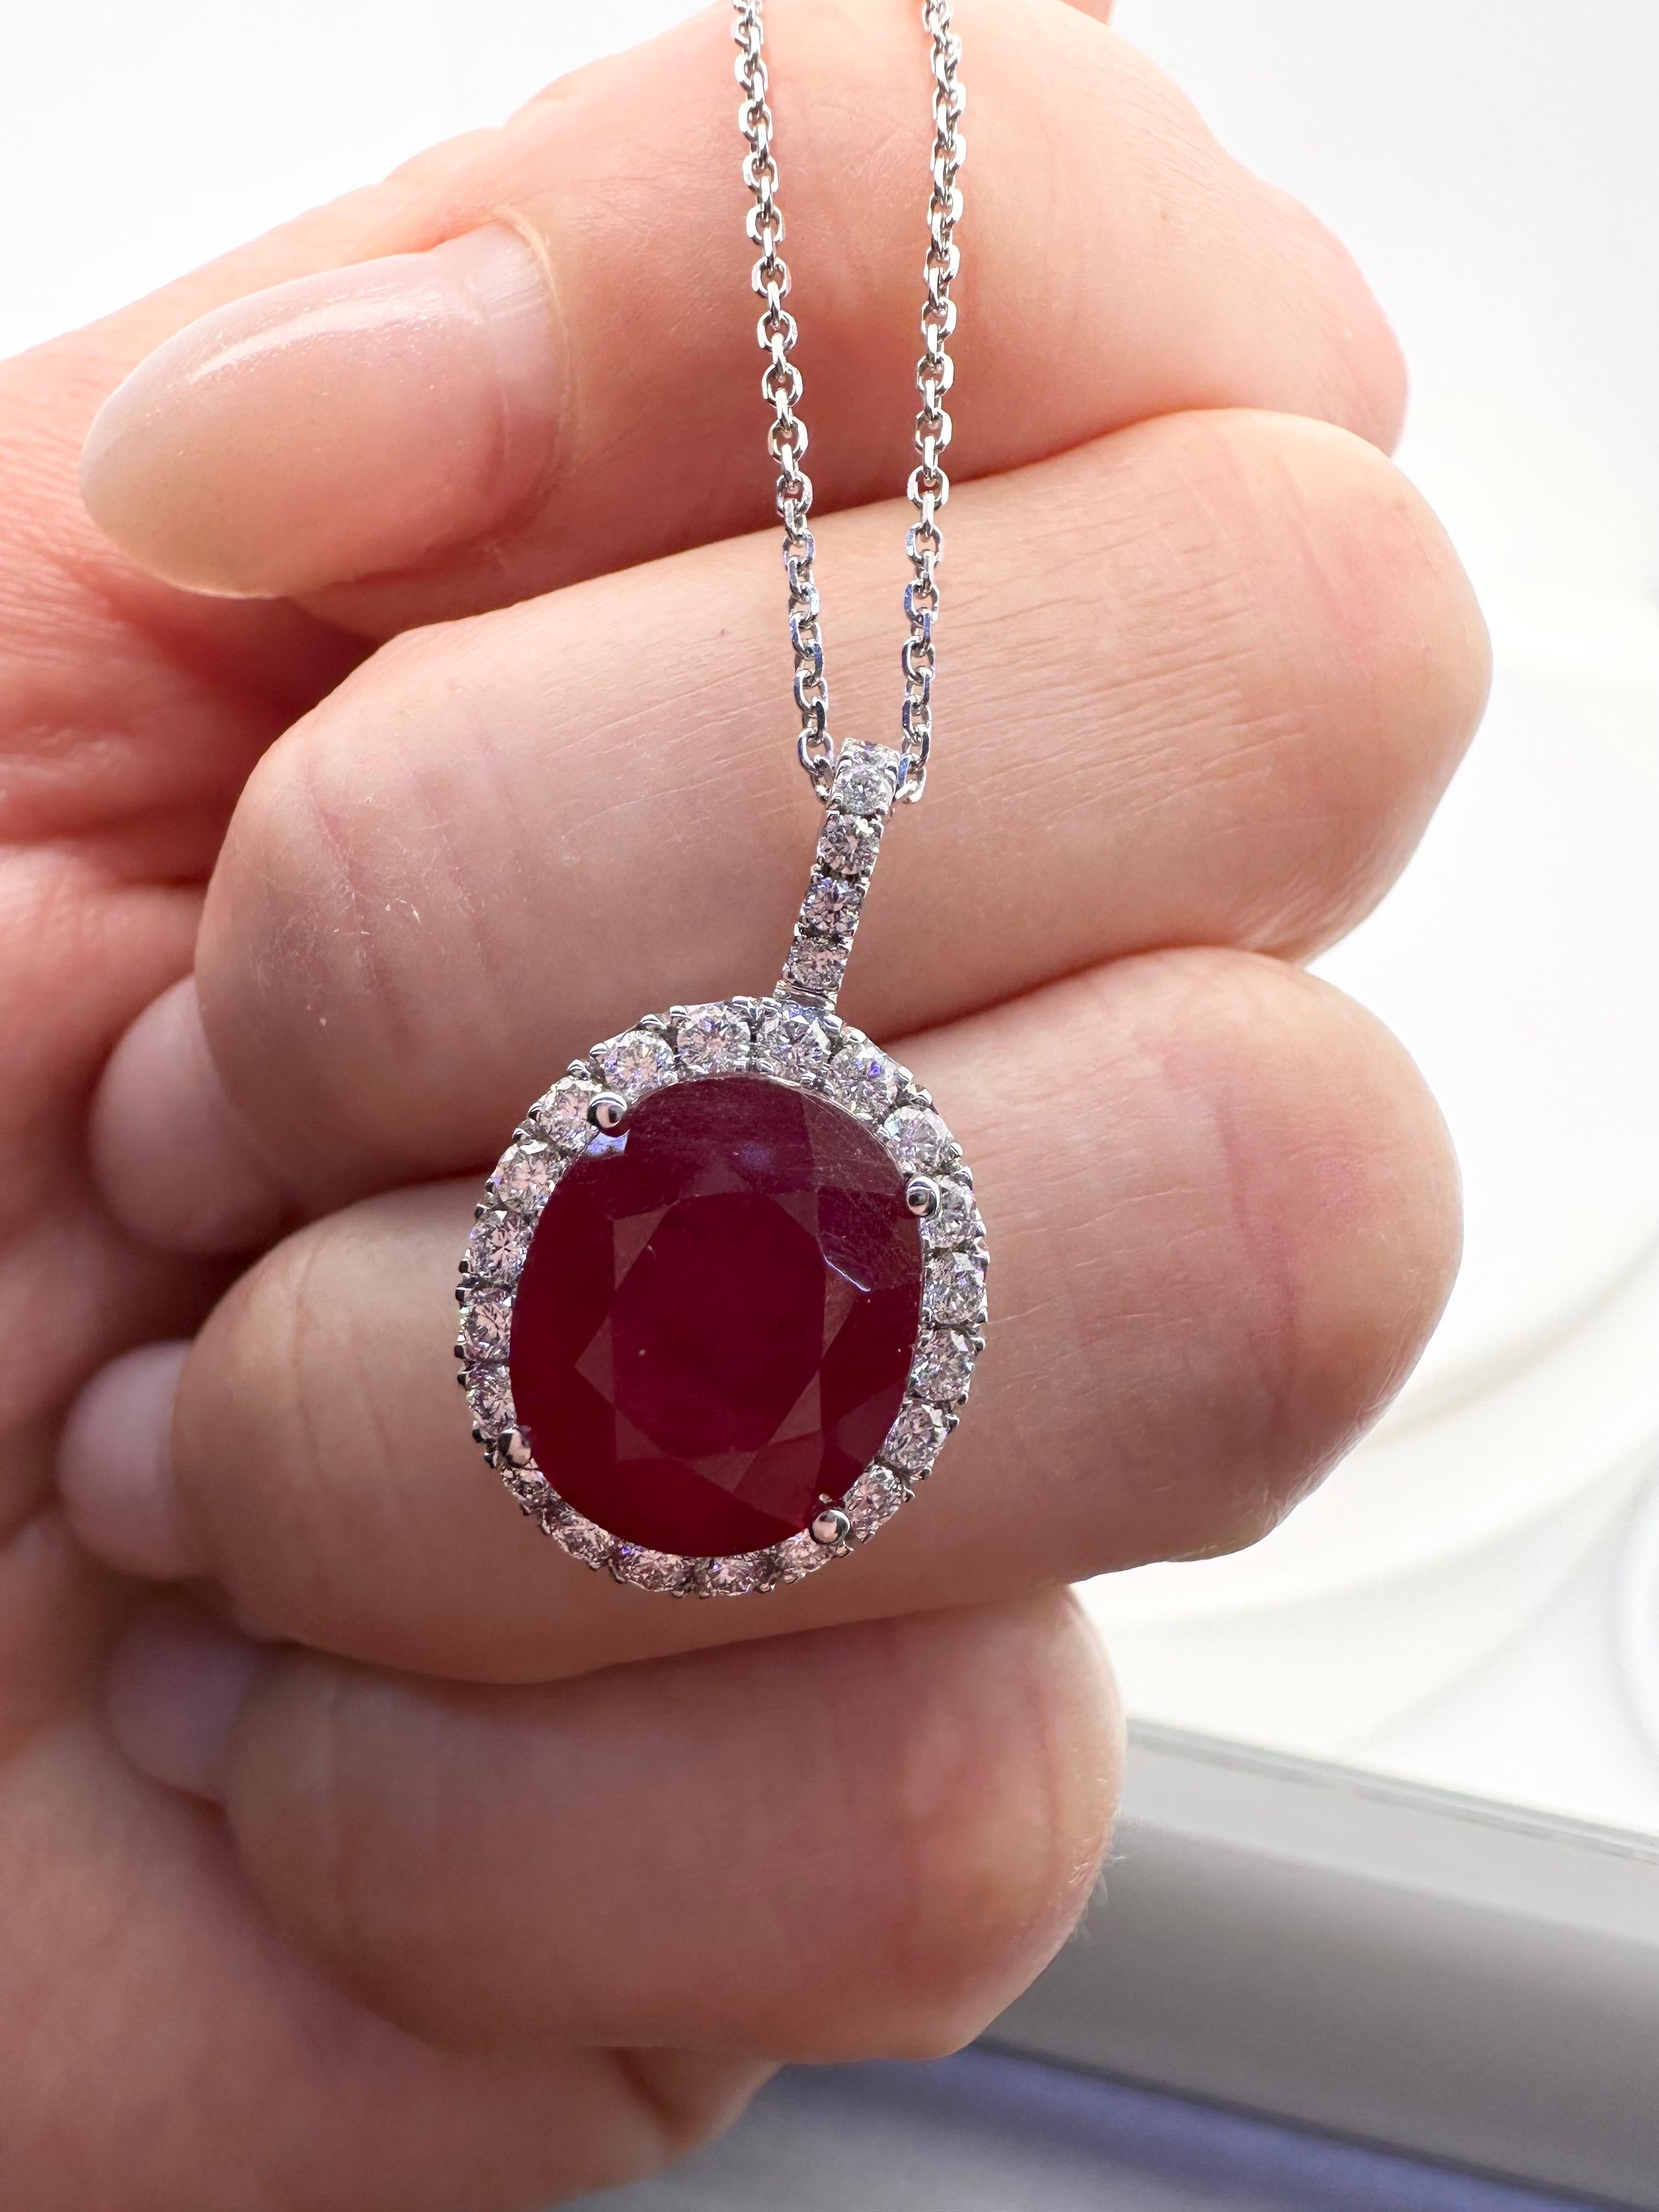 Oval ruby diamond pendant necklace 18KT gold In New Condition For Sale In Boca Raton, FL